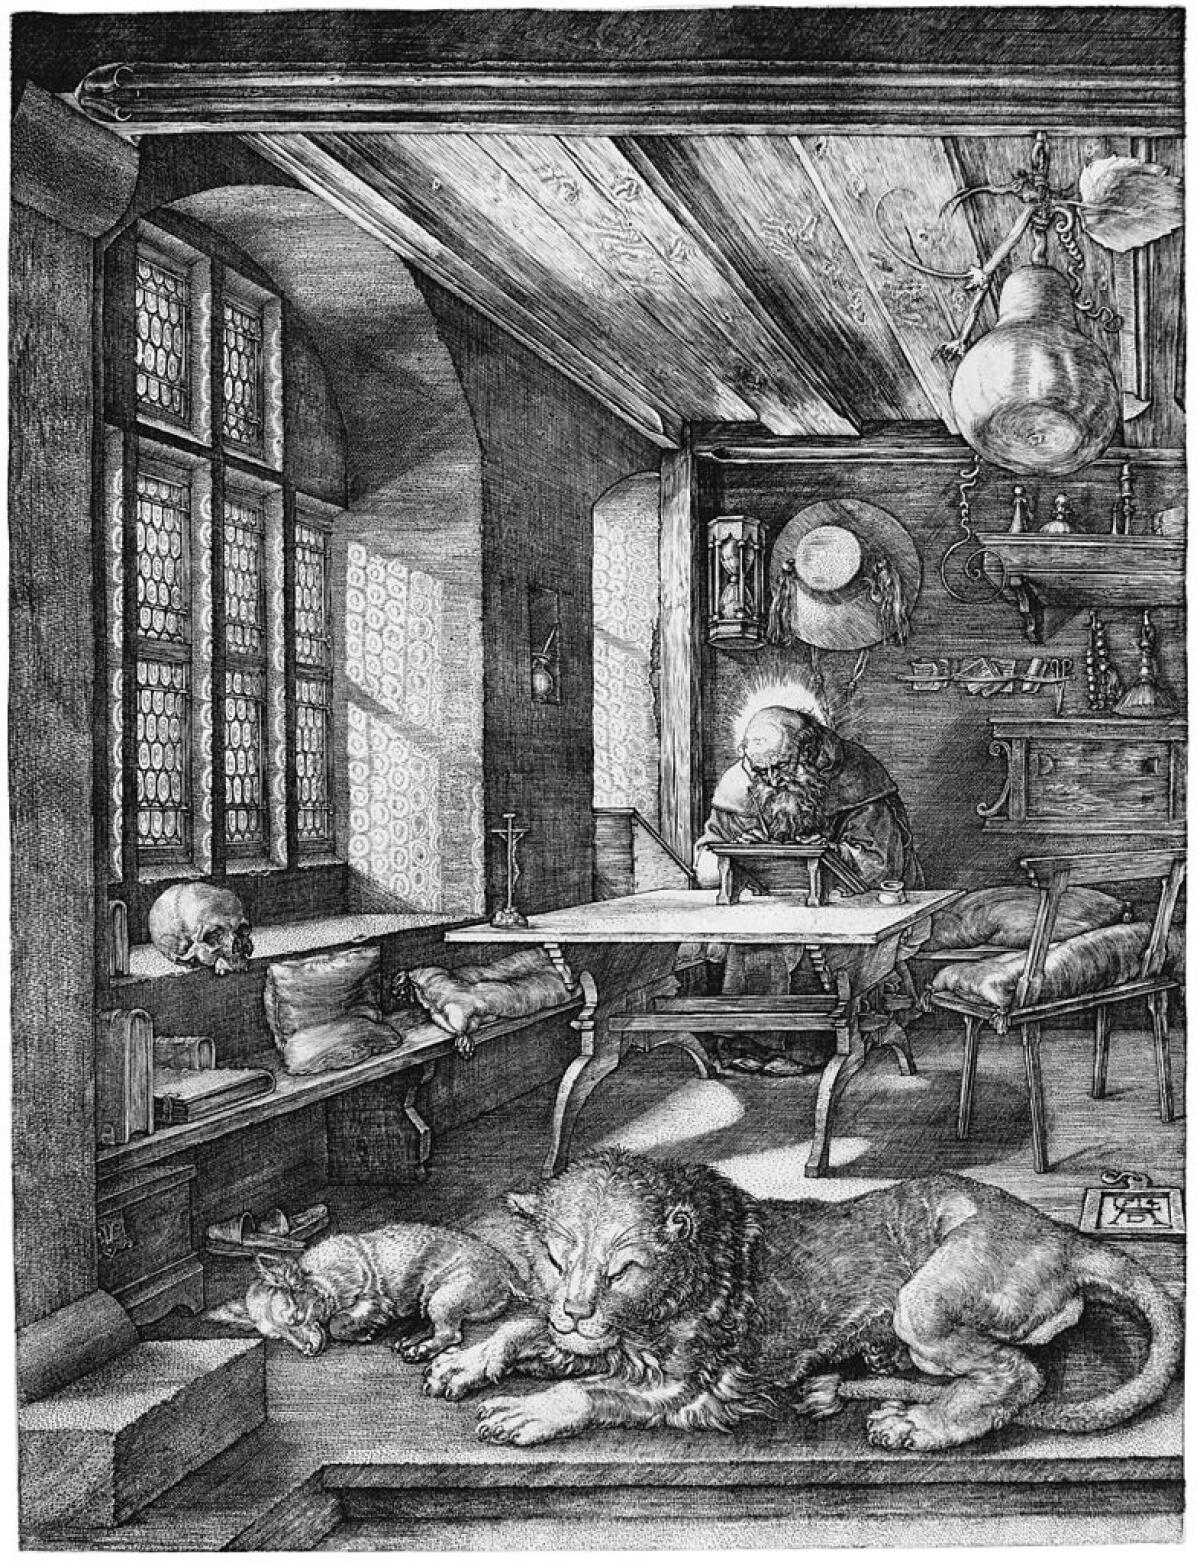 The Athenaeum Music & Arts Library continues its art history lecture series on Albrecht Dürer online Tuesday, Jan. 26.